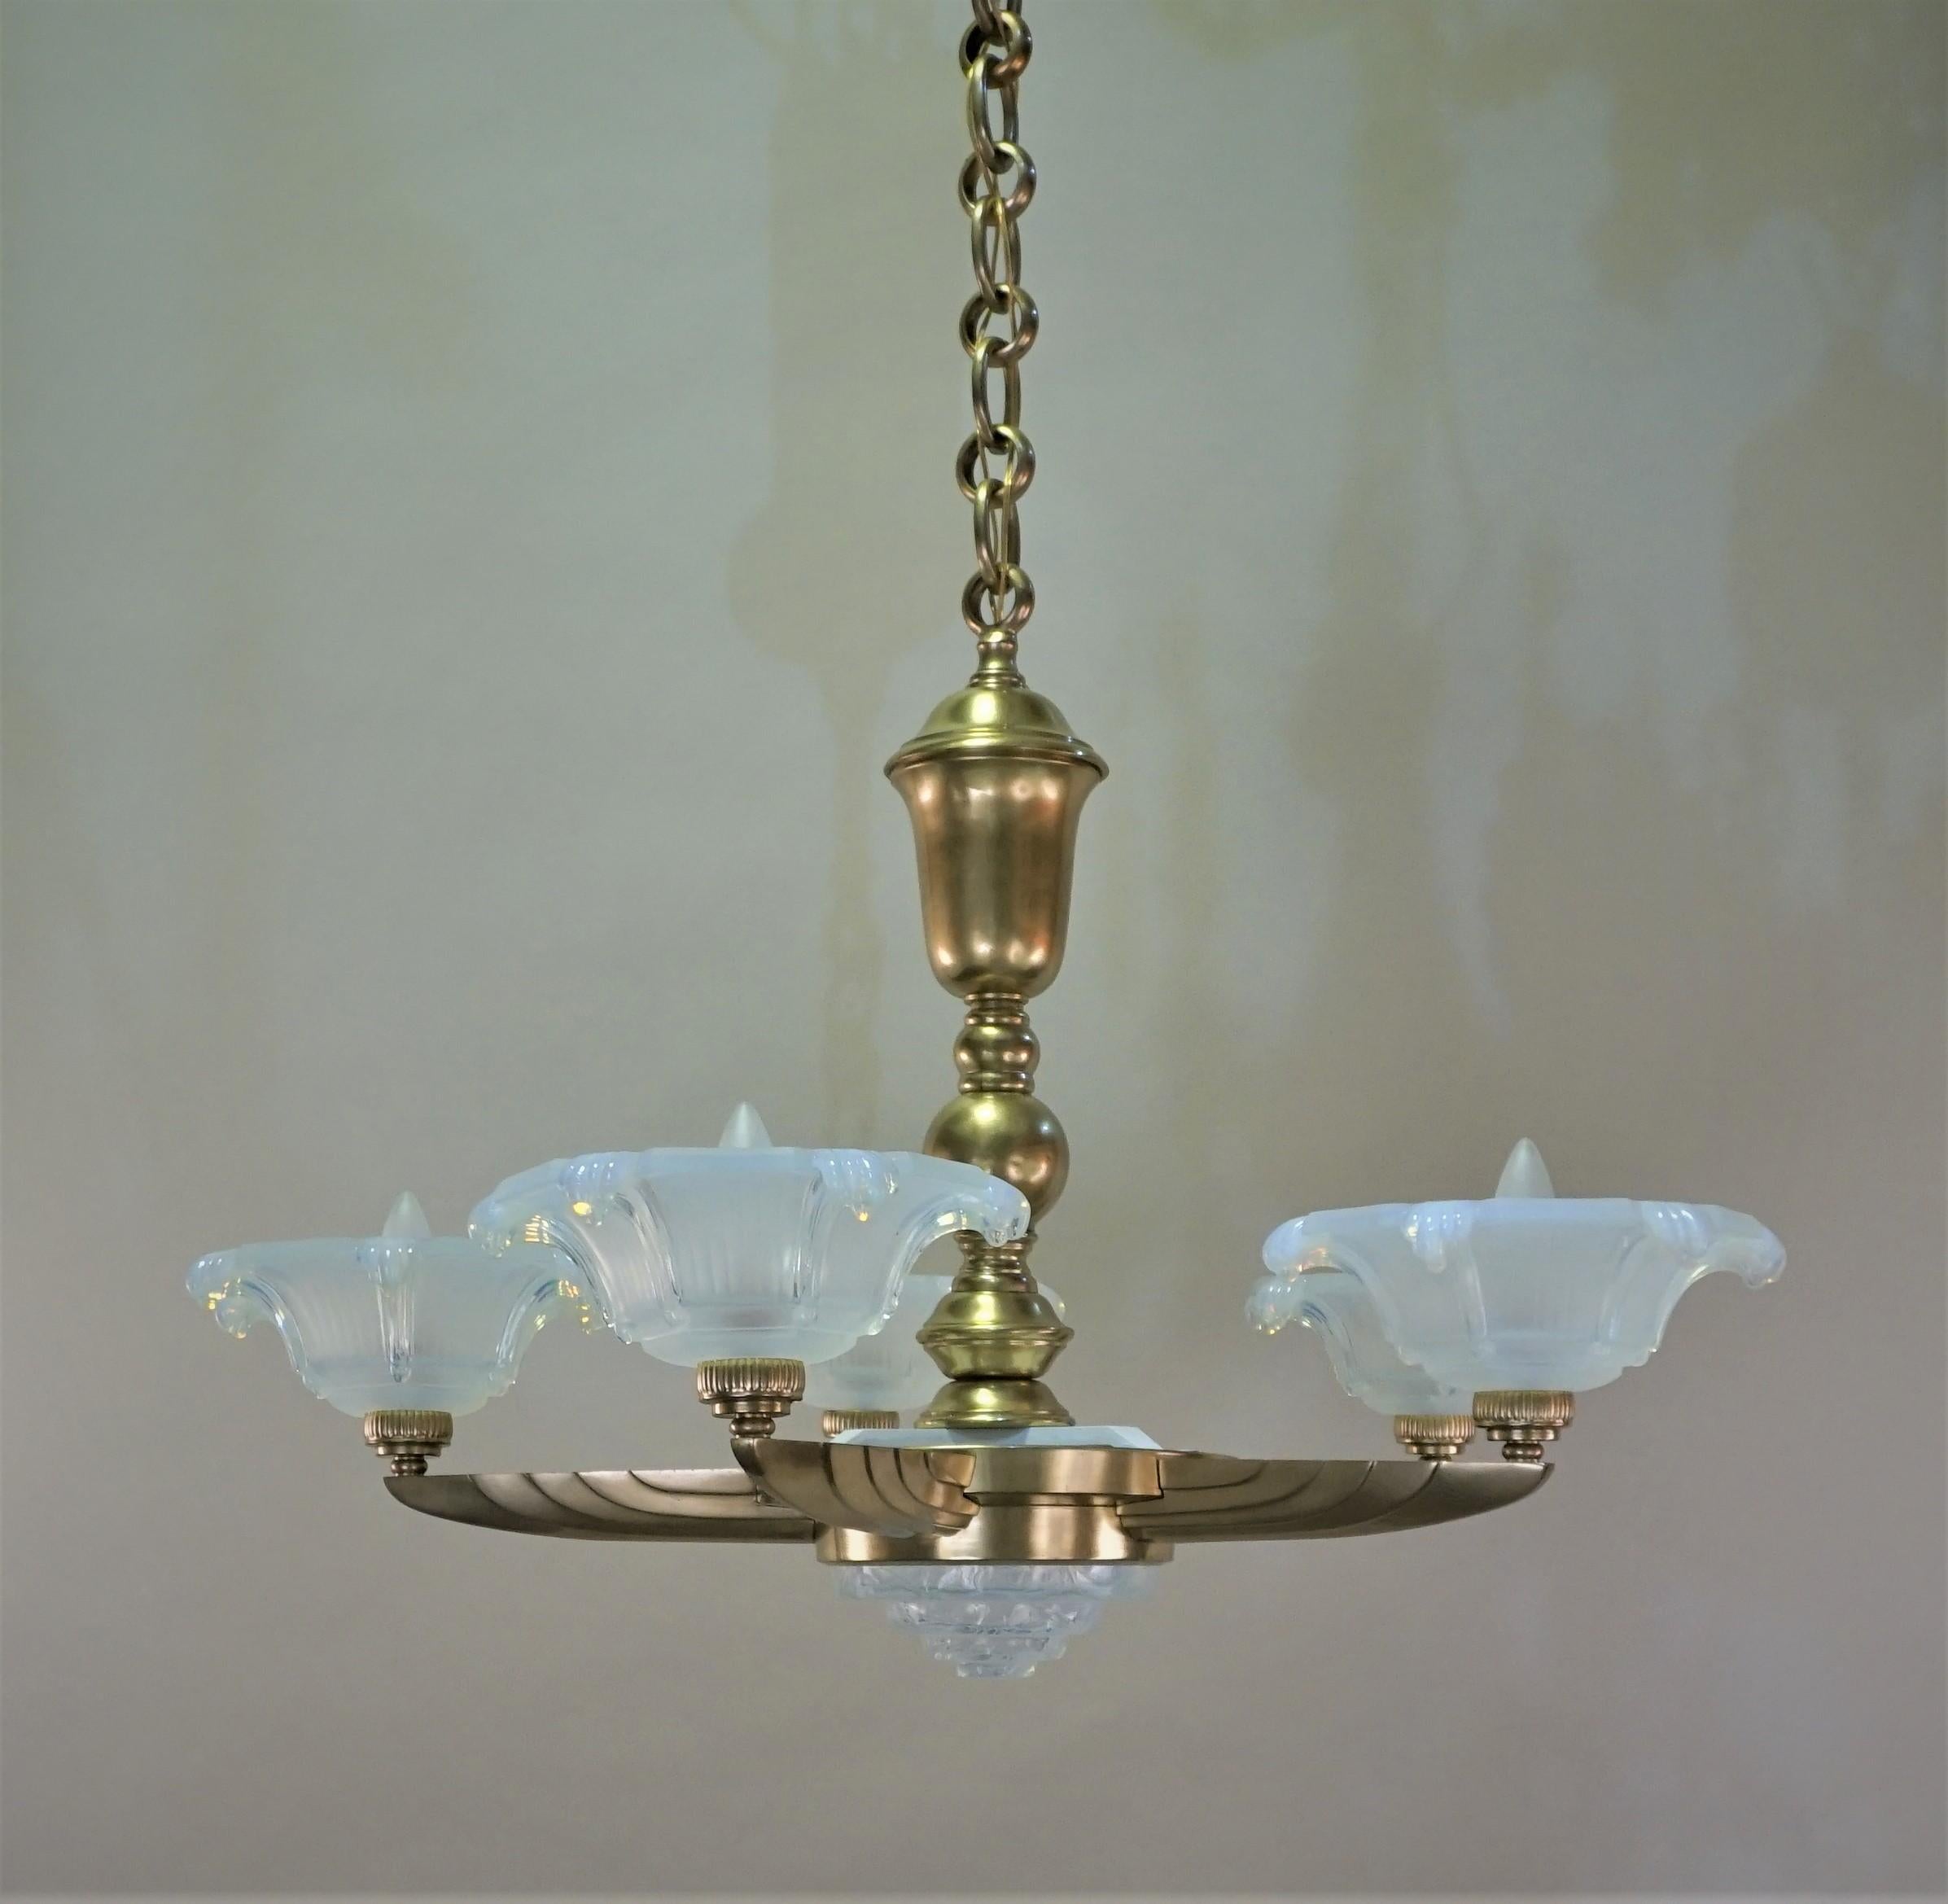 French 1930s Art Deco Bronze and Glass Chandelier by Ezan & Petitot 5